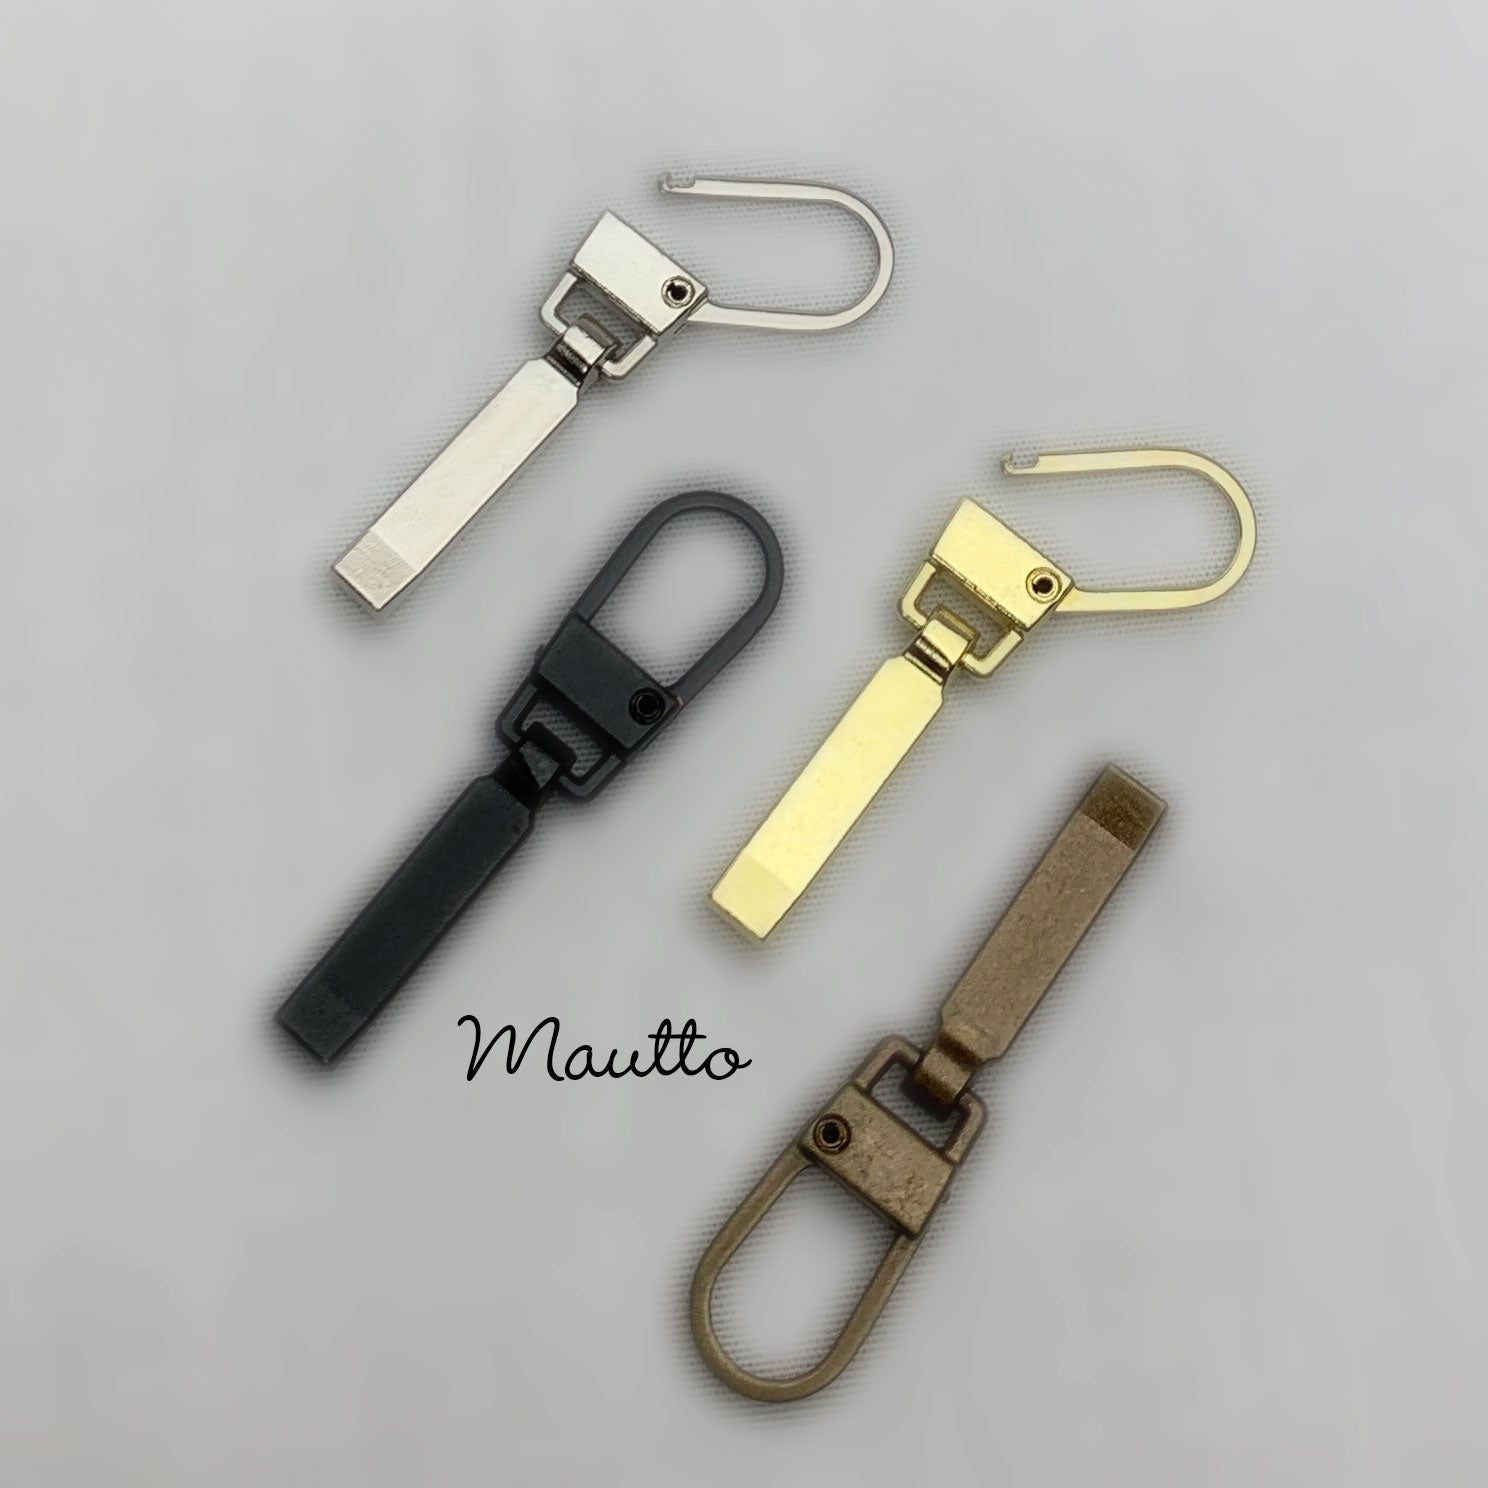 Simple Zipper Pull (Pull-tab) Replacement for Purses, Apparel